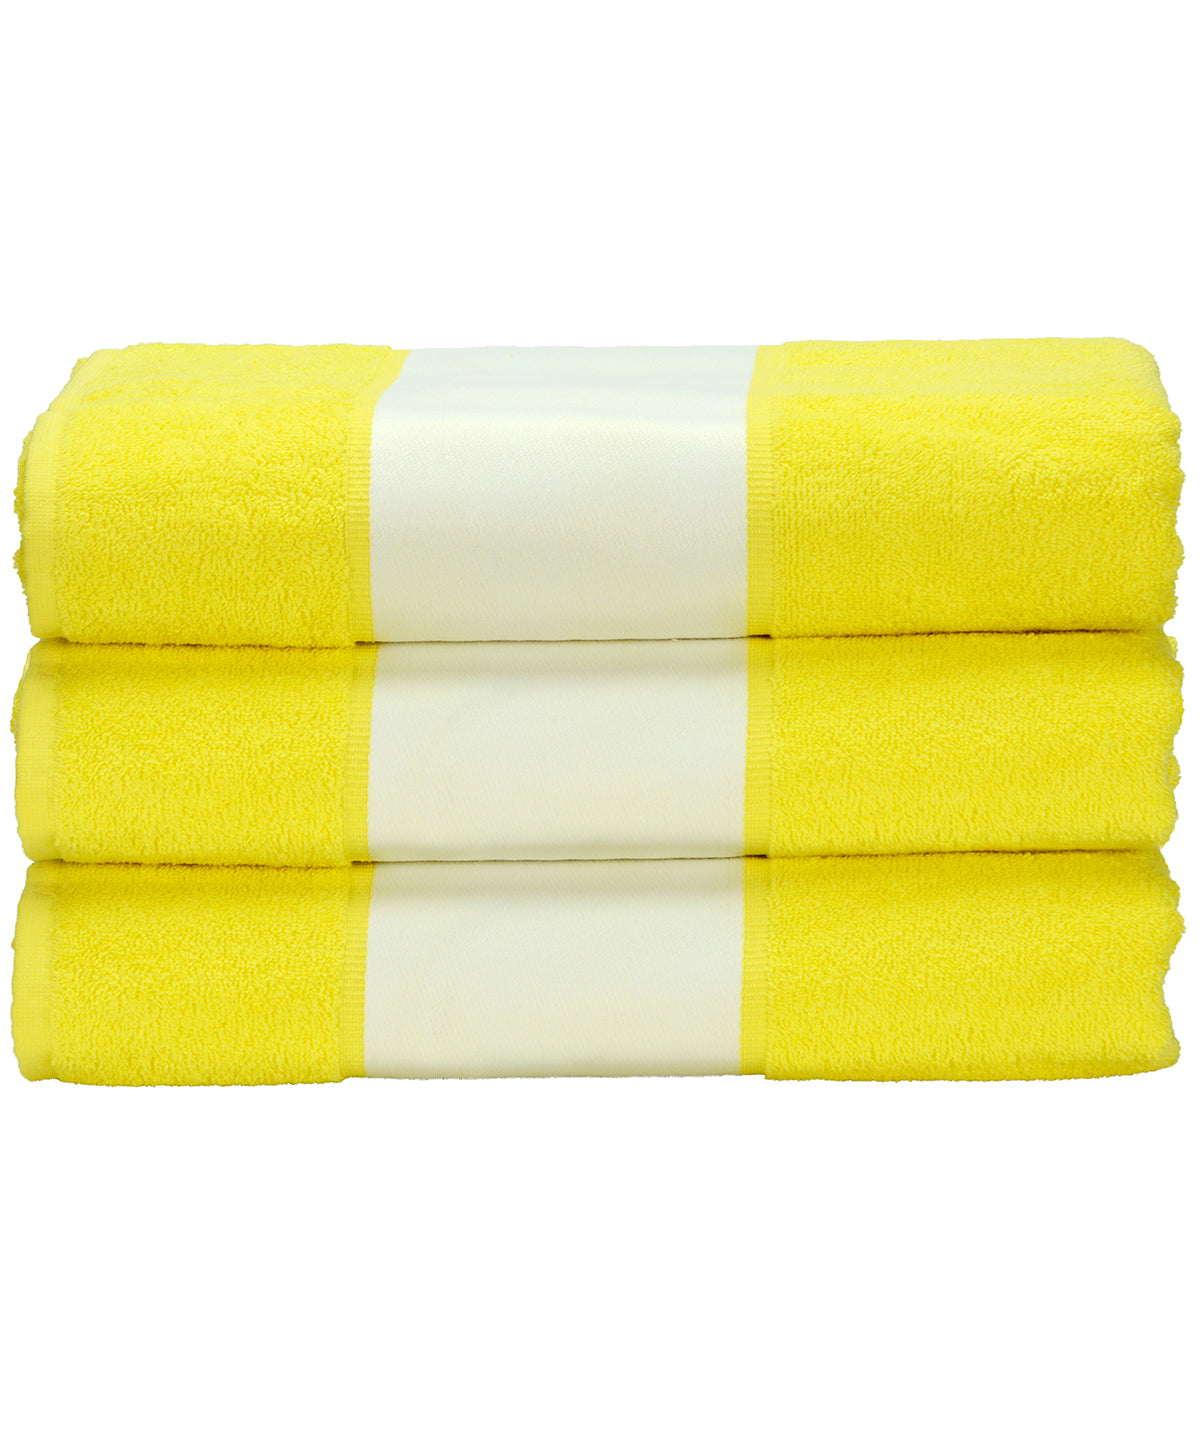 Personalised Towels - Light Yellow A&R Towels ARTG® SUBLI-Me® hand towel